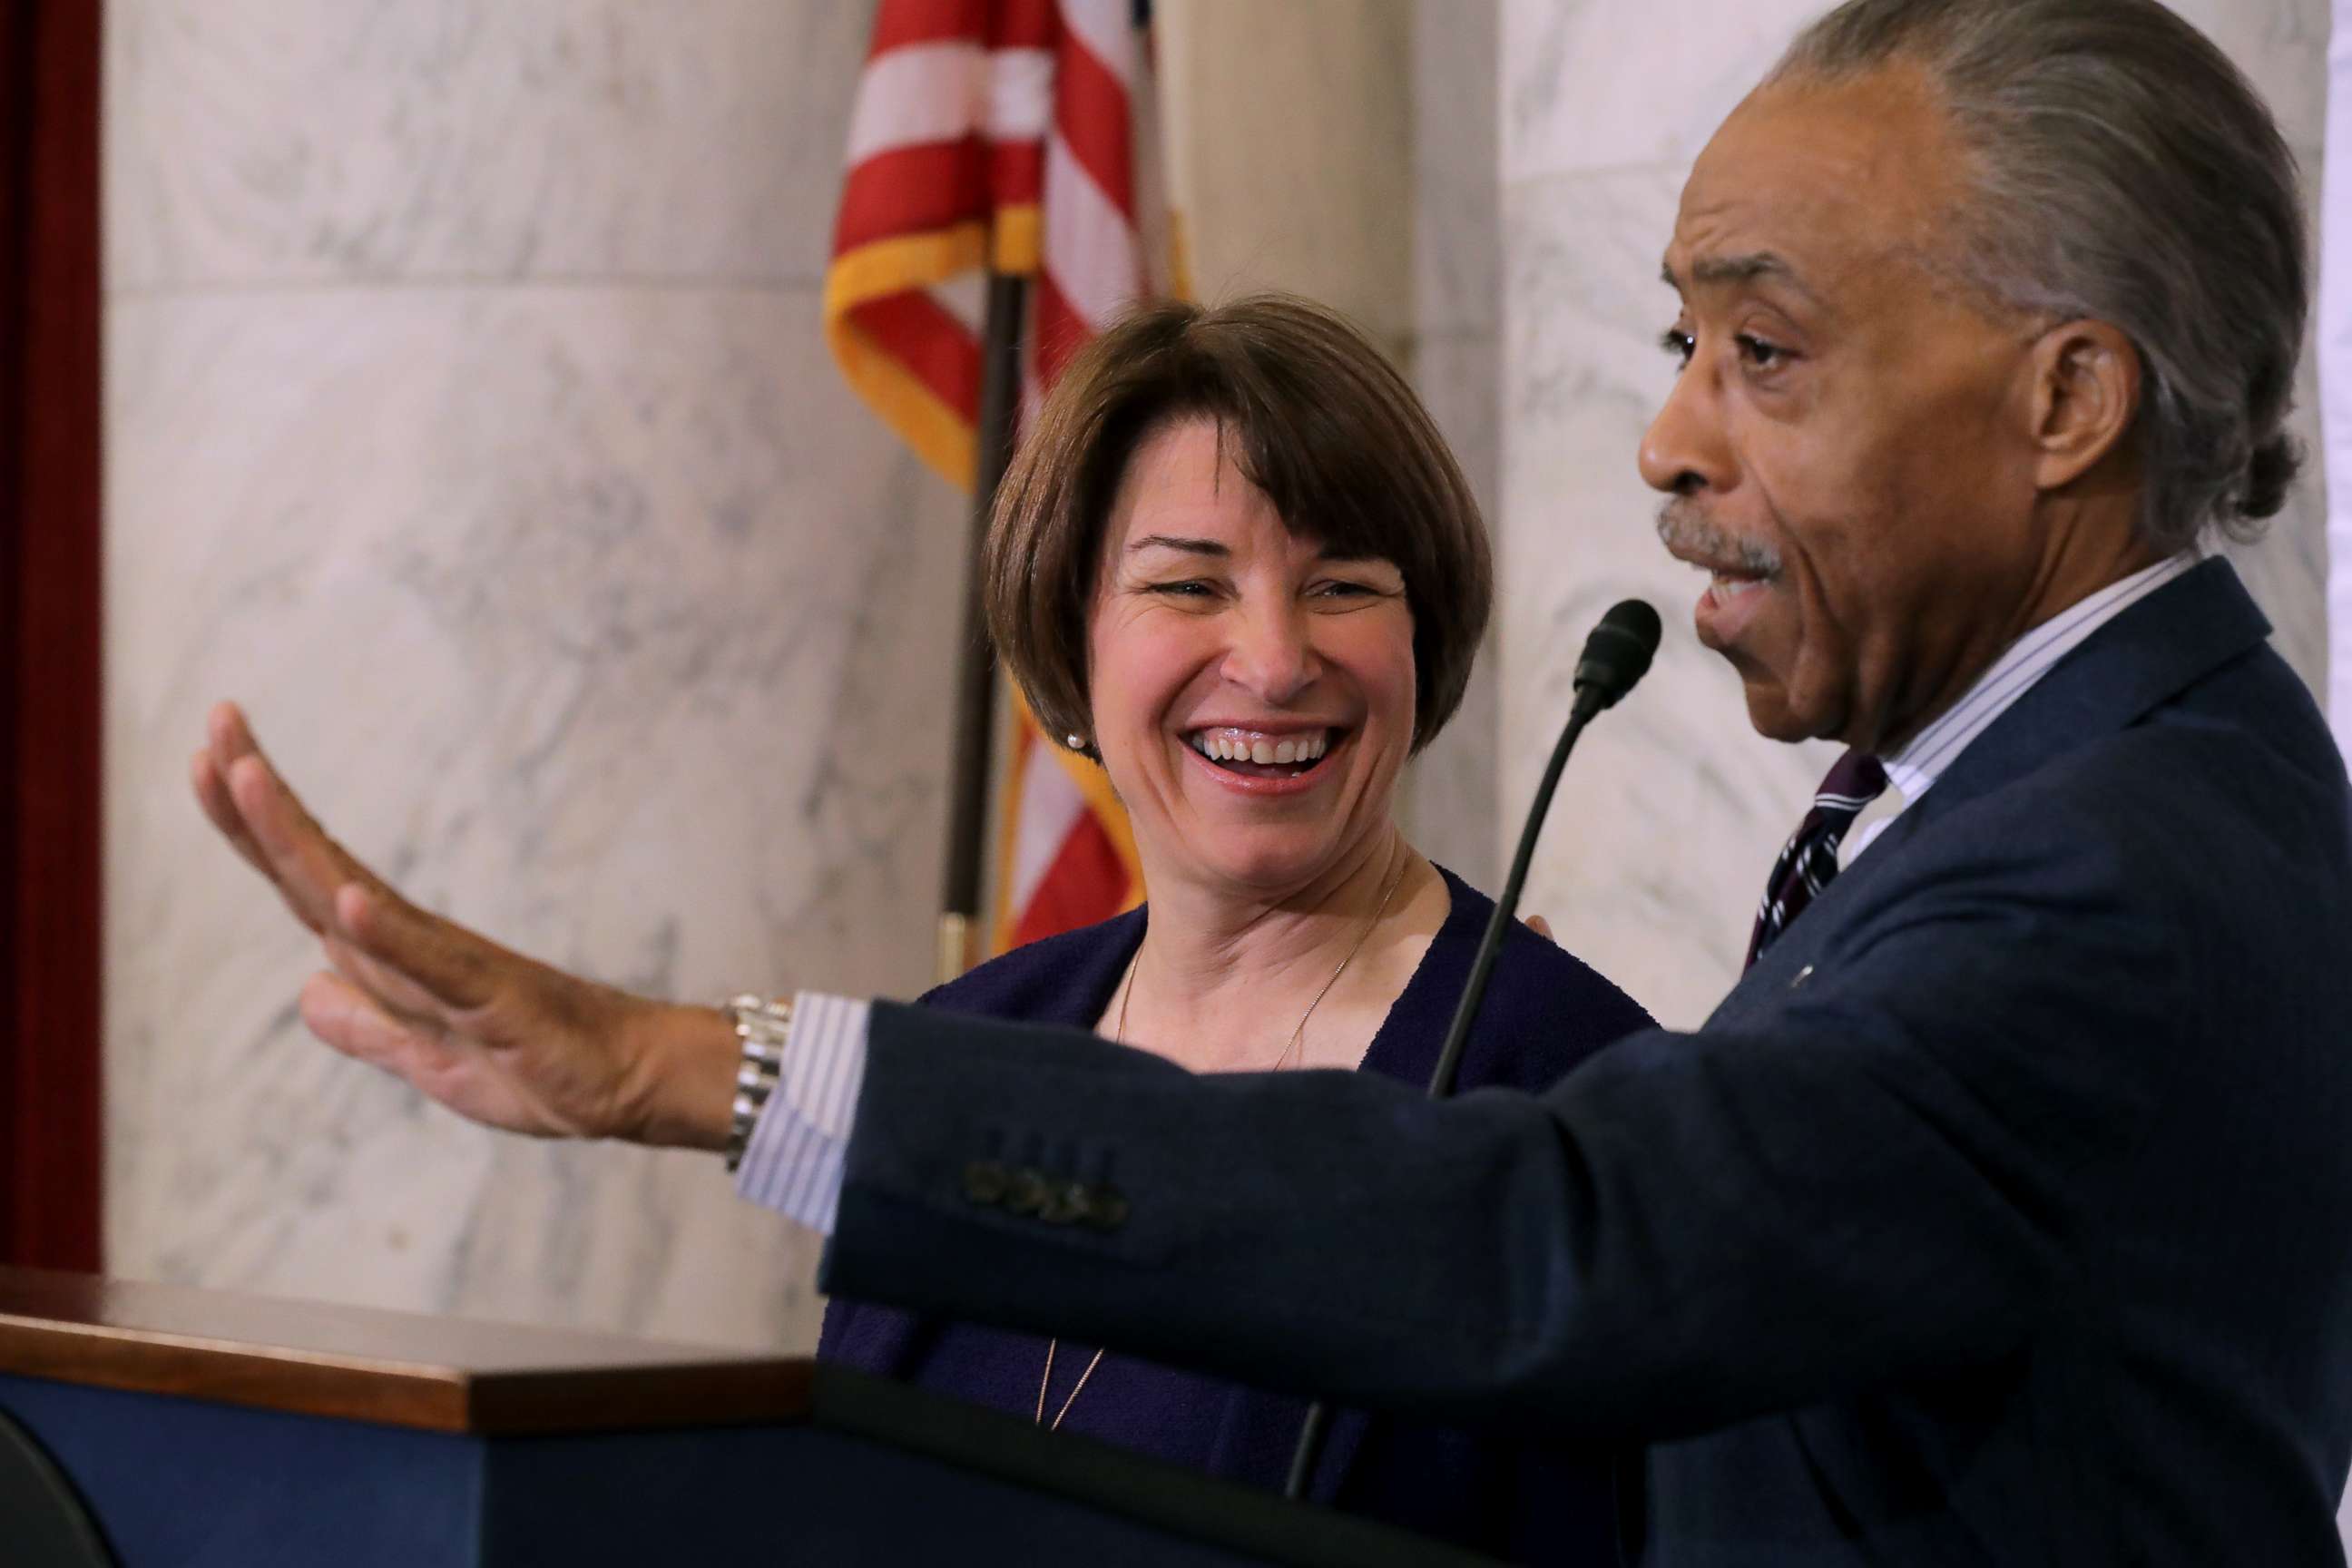 PHOTO: The Rev. Al Sharpton welcomes Sen. Amy Klobuchar (D-MN) to the podium before she addresses a post-midterm election meeting of Sharpton's National Action Network on Capitol Hill, Nov. 13, 2018. 